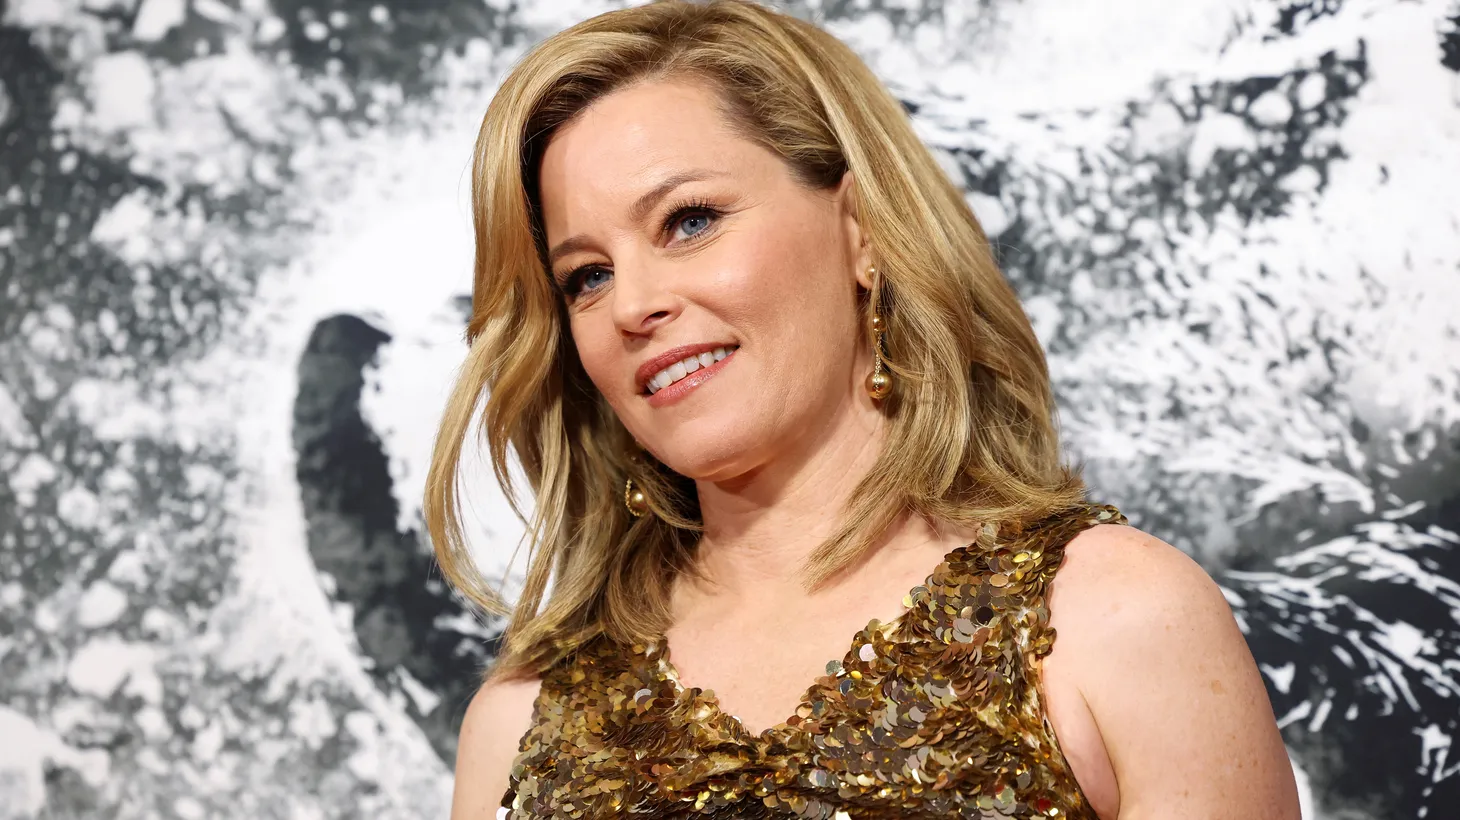 Director and producer Elizabeth Banks attends a premiere for her film 'Cocaine Bear' in Los Angeles on February 21, 2023.